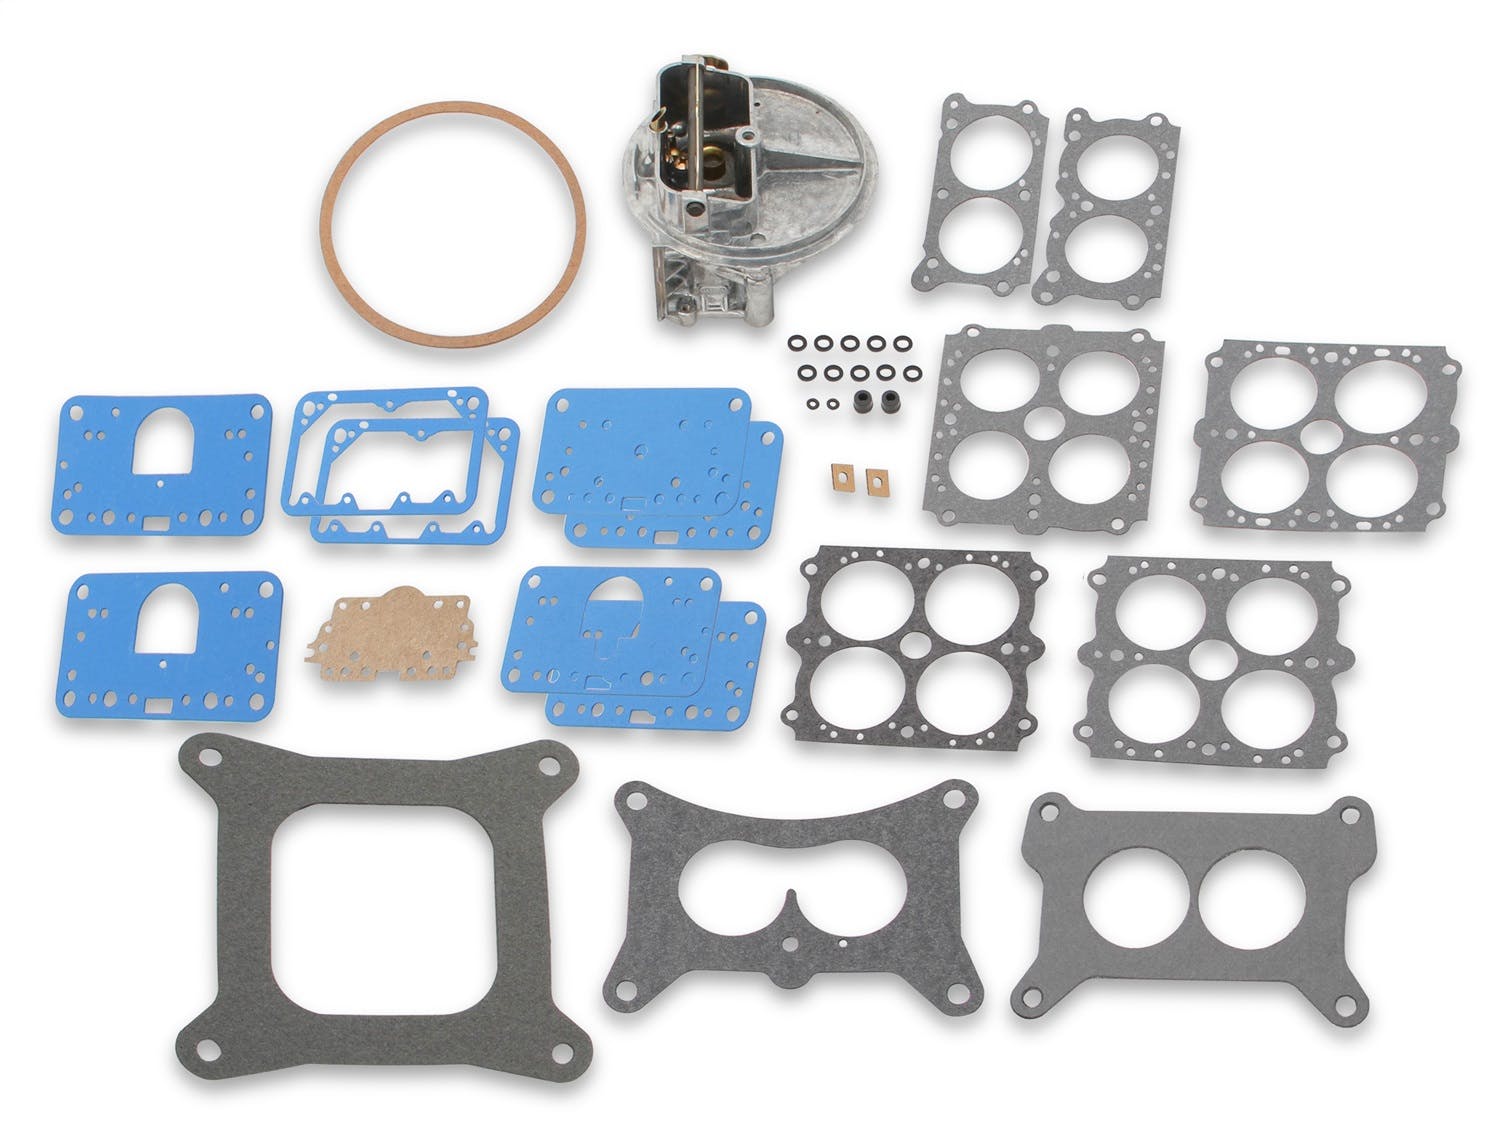 Holley 134-335 REPLACEMENT MAIN BODY KIT FOR 0-4412S